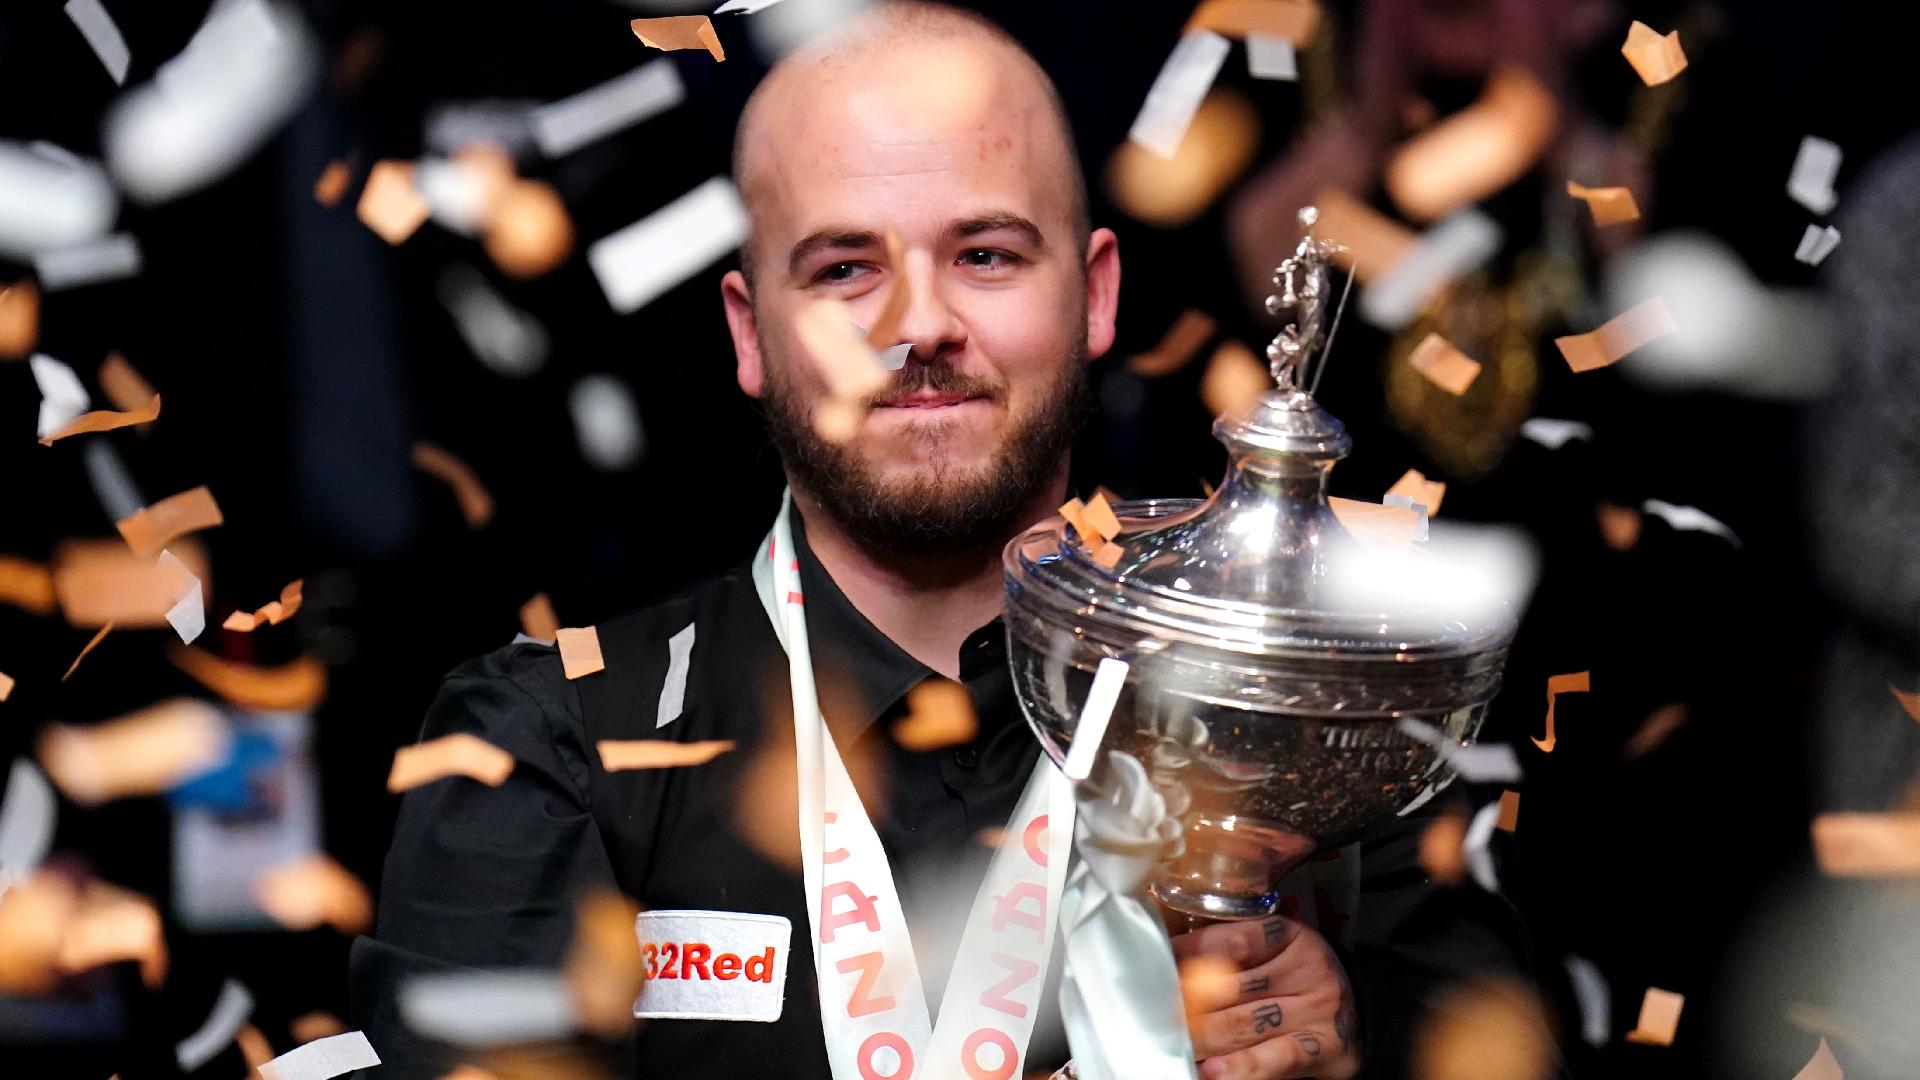 World Snooker Championship final 2023 LIVE RESULTS: Brecel BEATS Selby  18-15 to win maiden world championship - updates